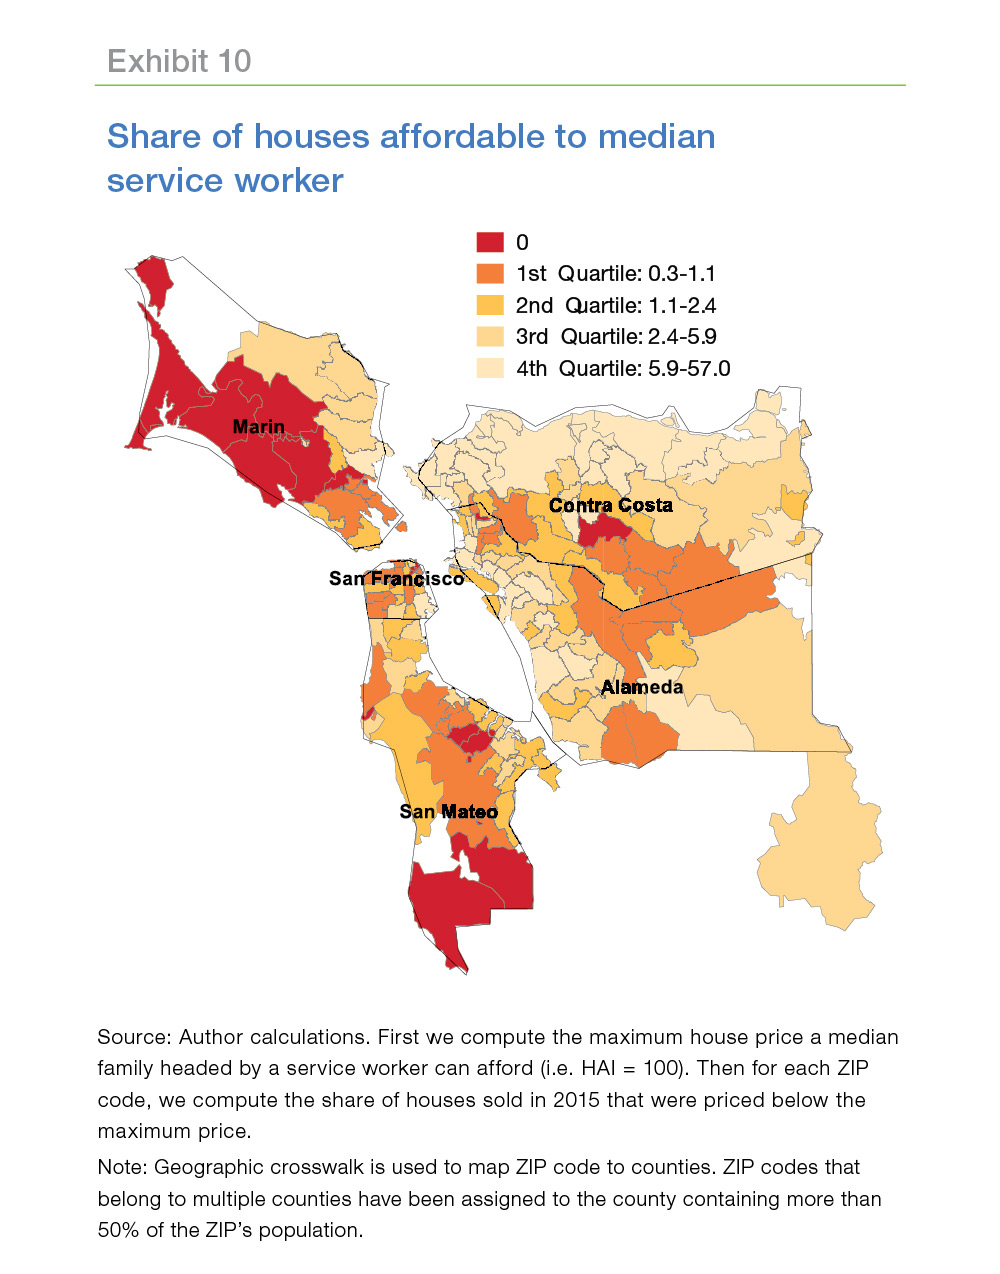 Maps showing the share of houses affordable to median service worker